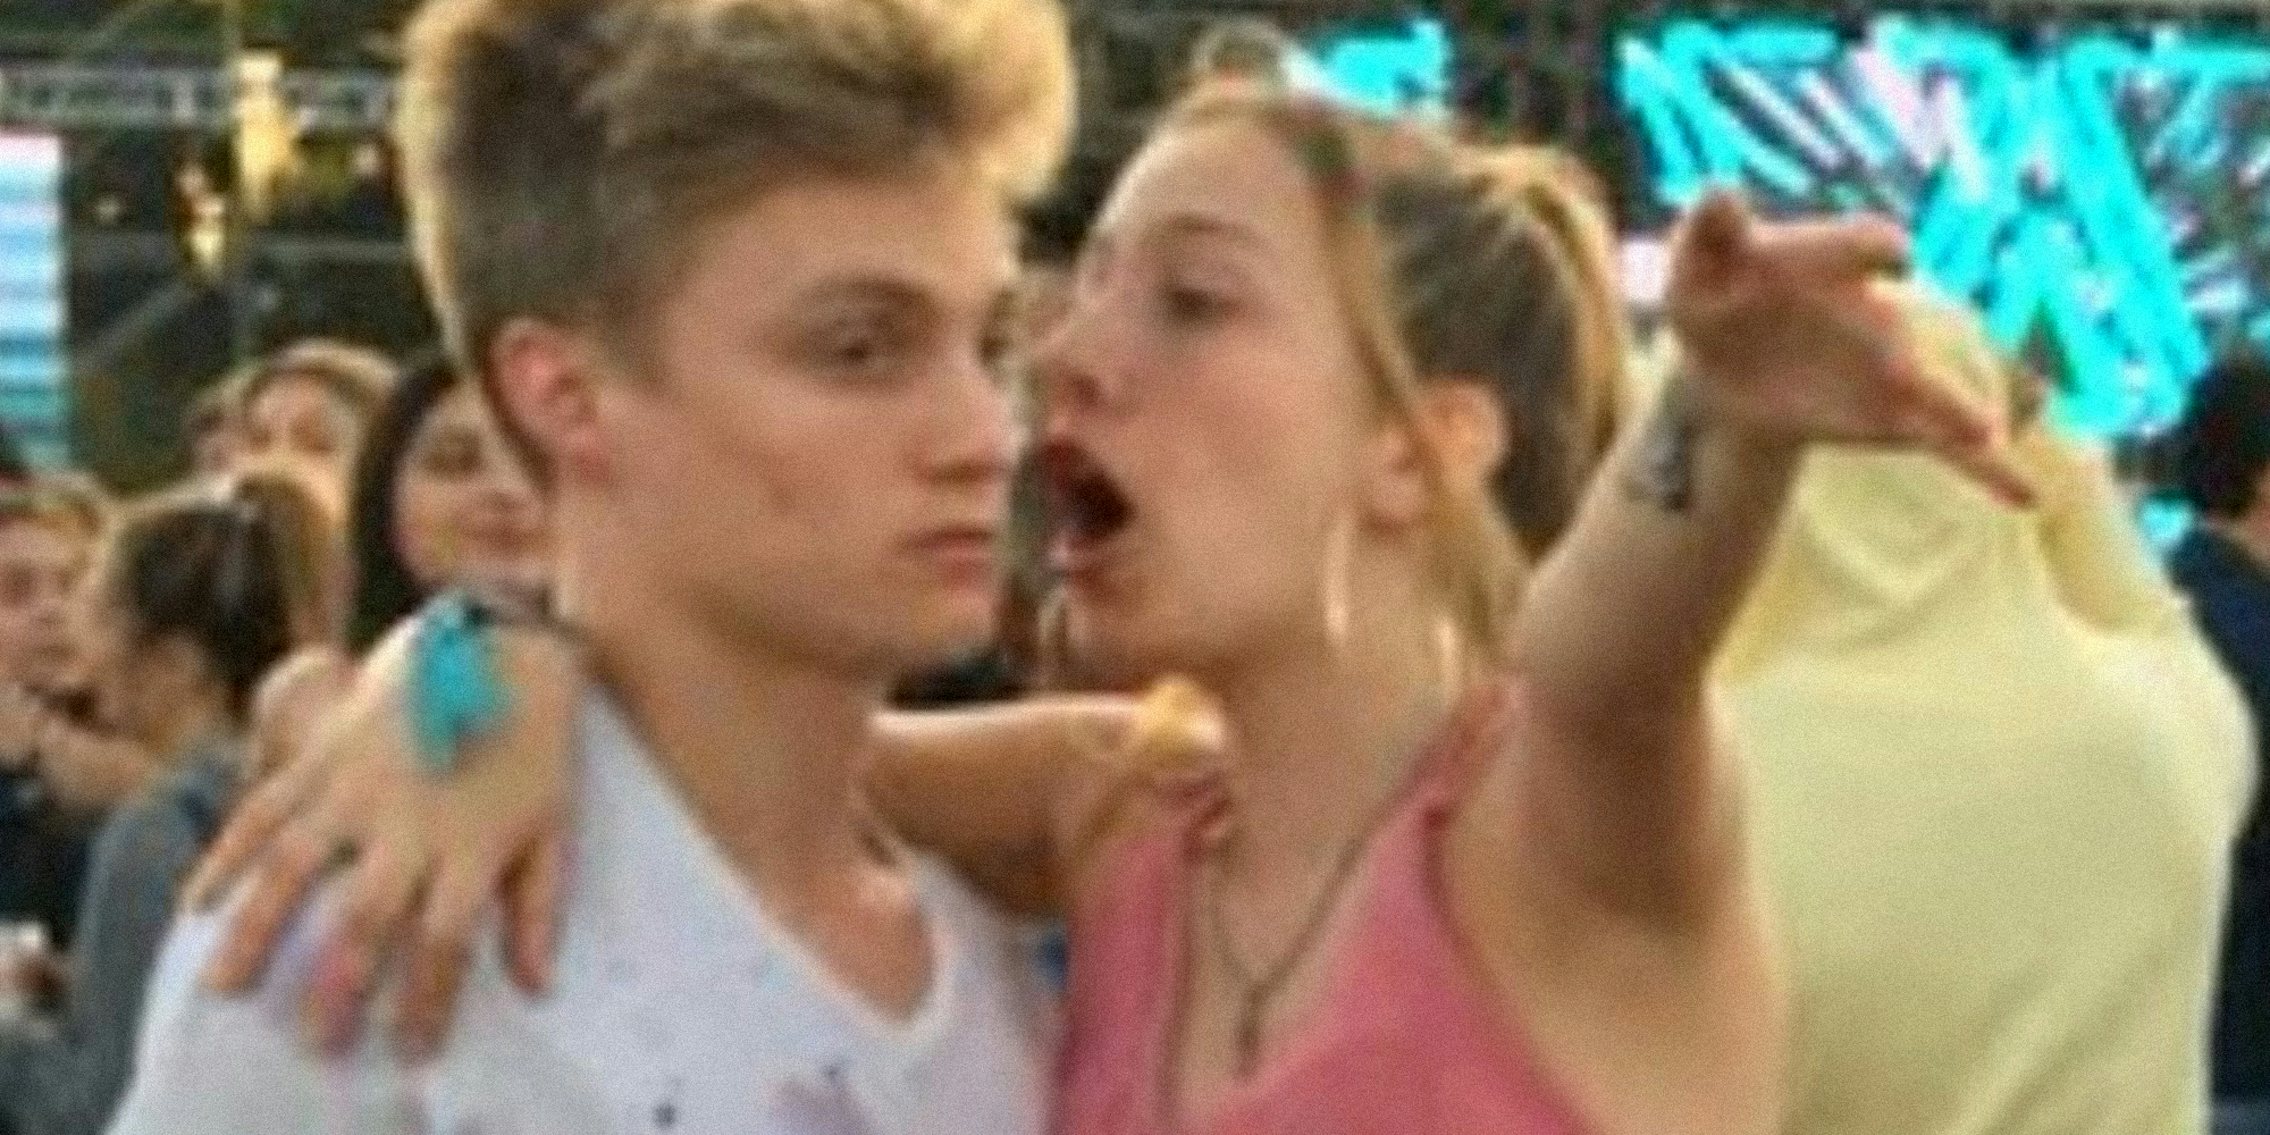 young woman with arm around a young man, speaking to him in a crowd